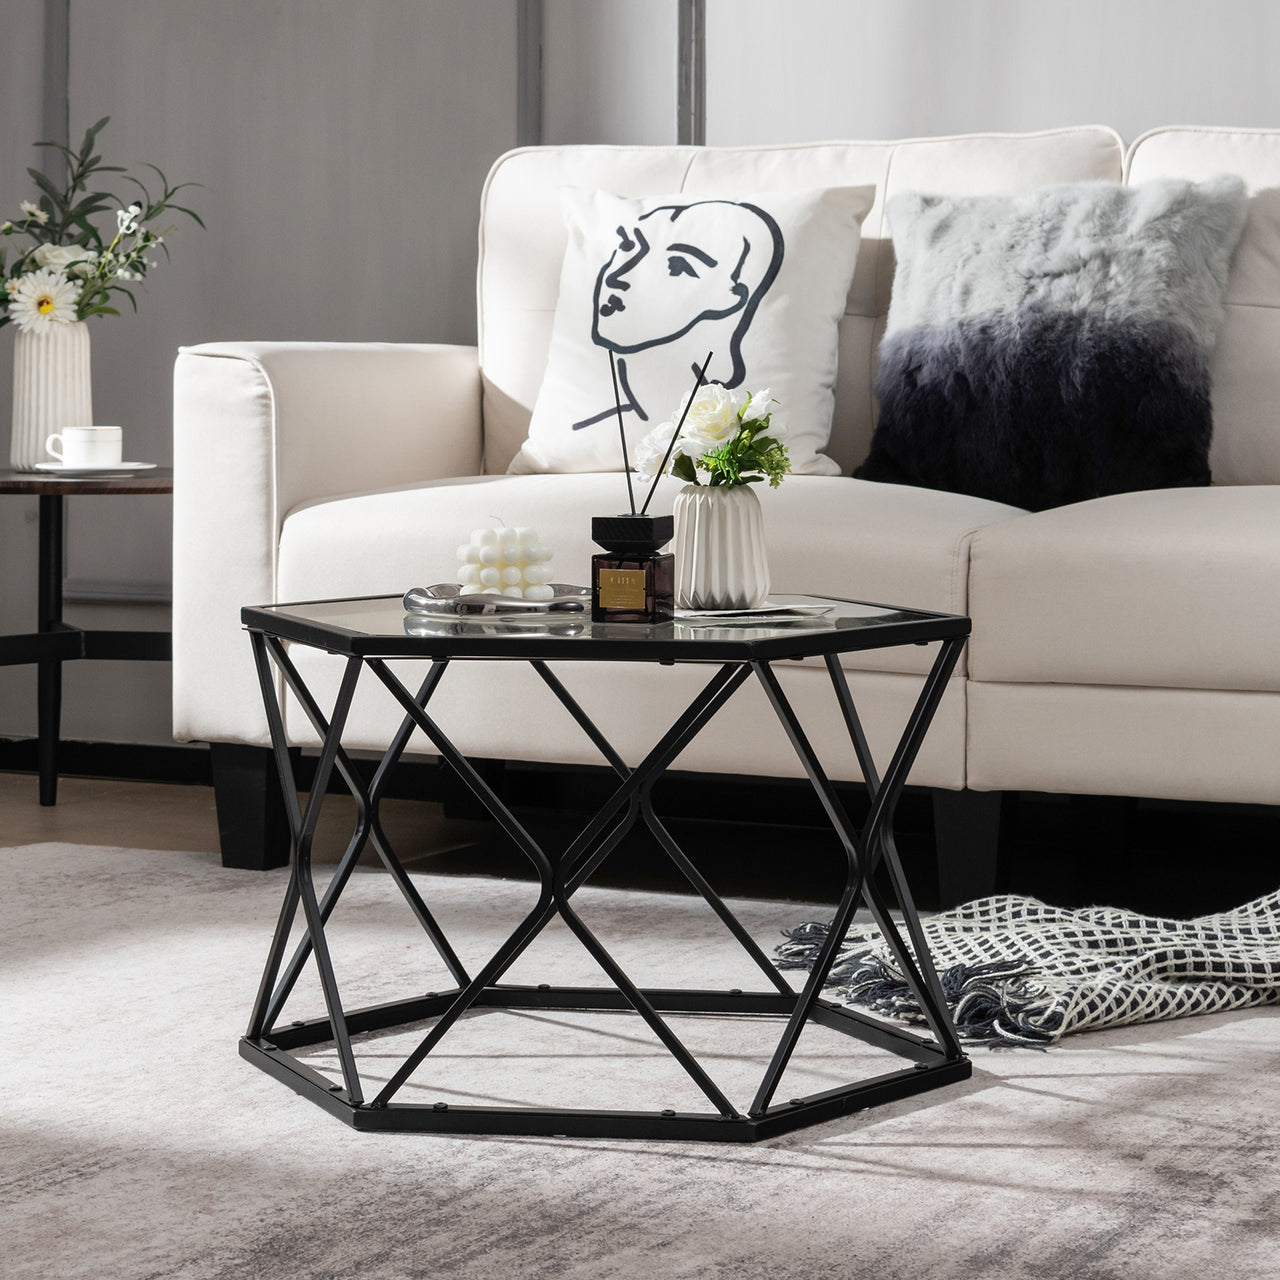 Modern Accent Geometric Glass Coffee Table - Gallery View 6 of 9